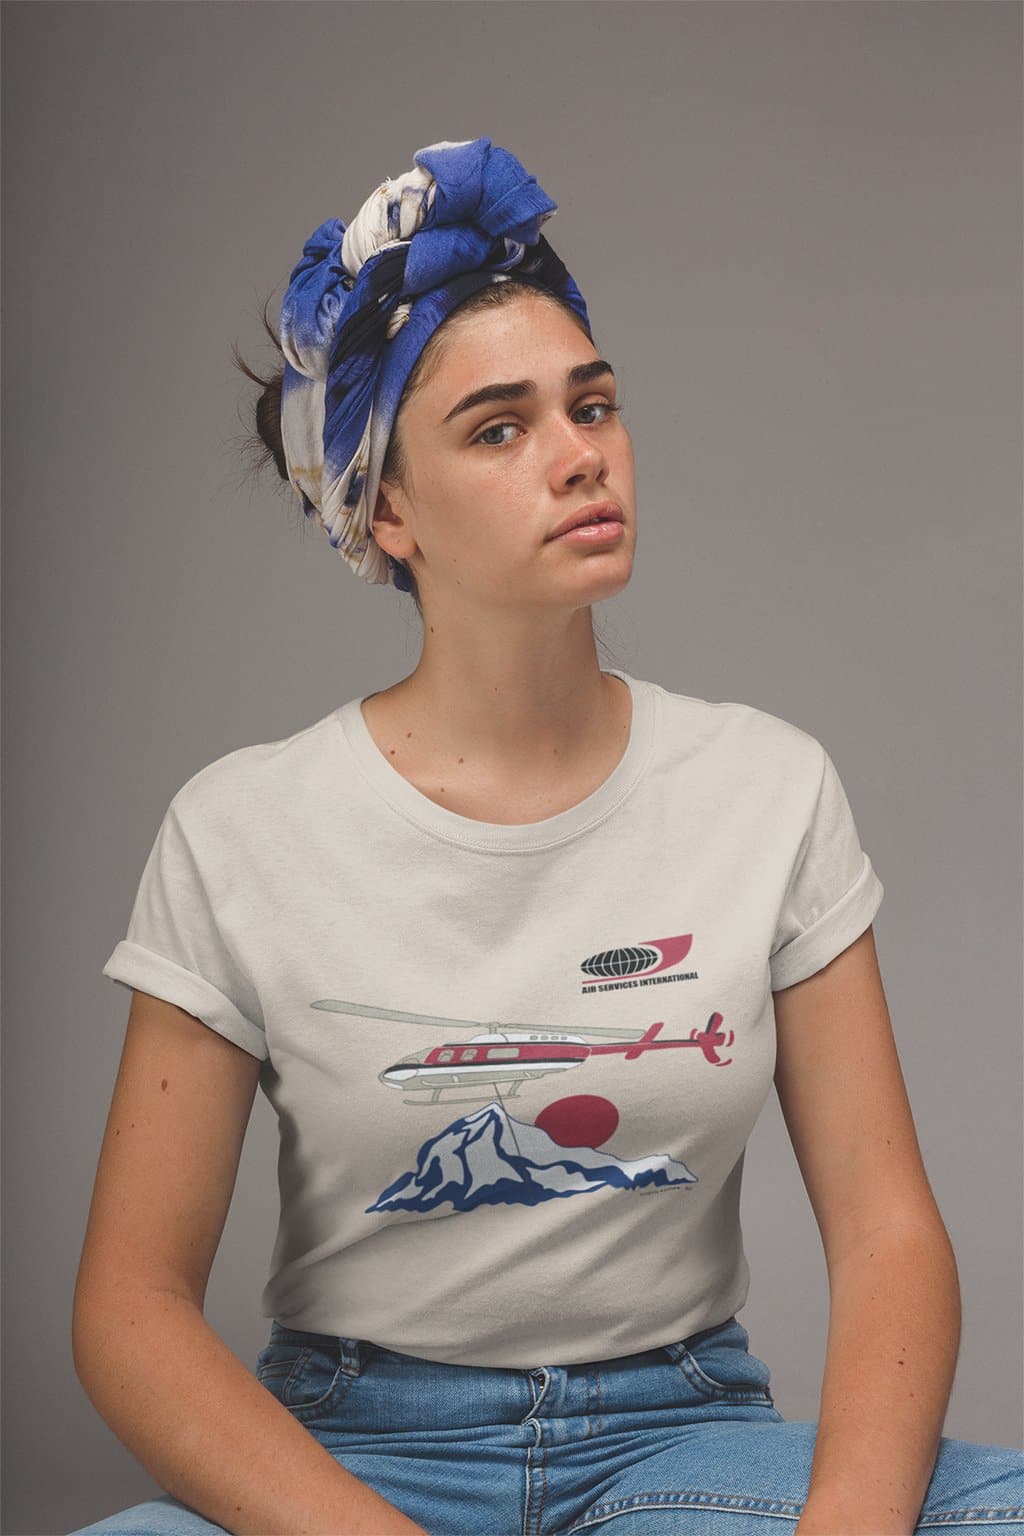 Dynamite Duds Napoleon Dynamite air services International helicopter t-shirt woman